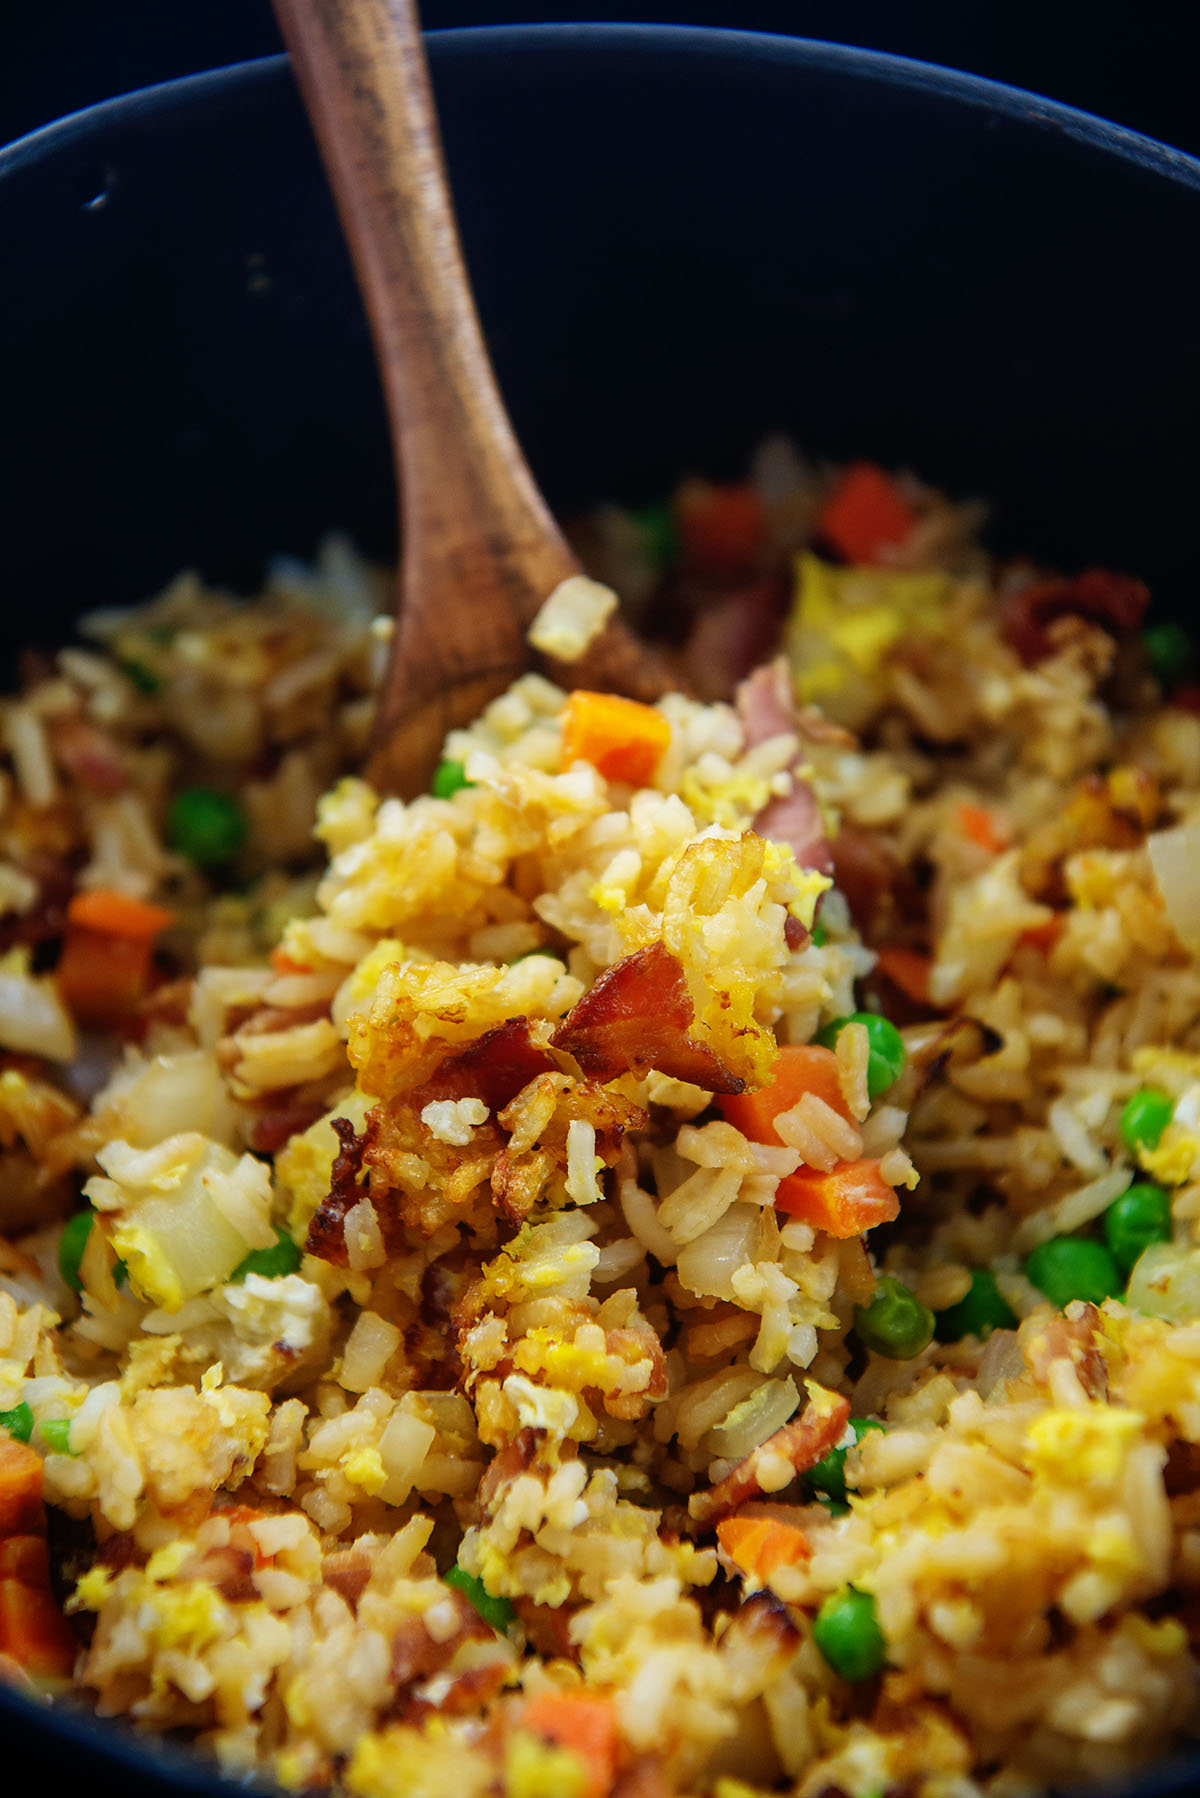 A wooden spoon dipping into fried rice.